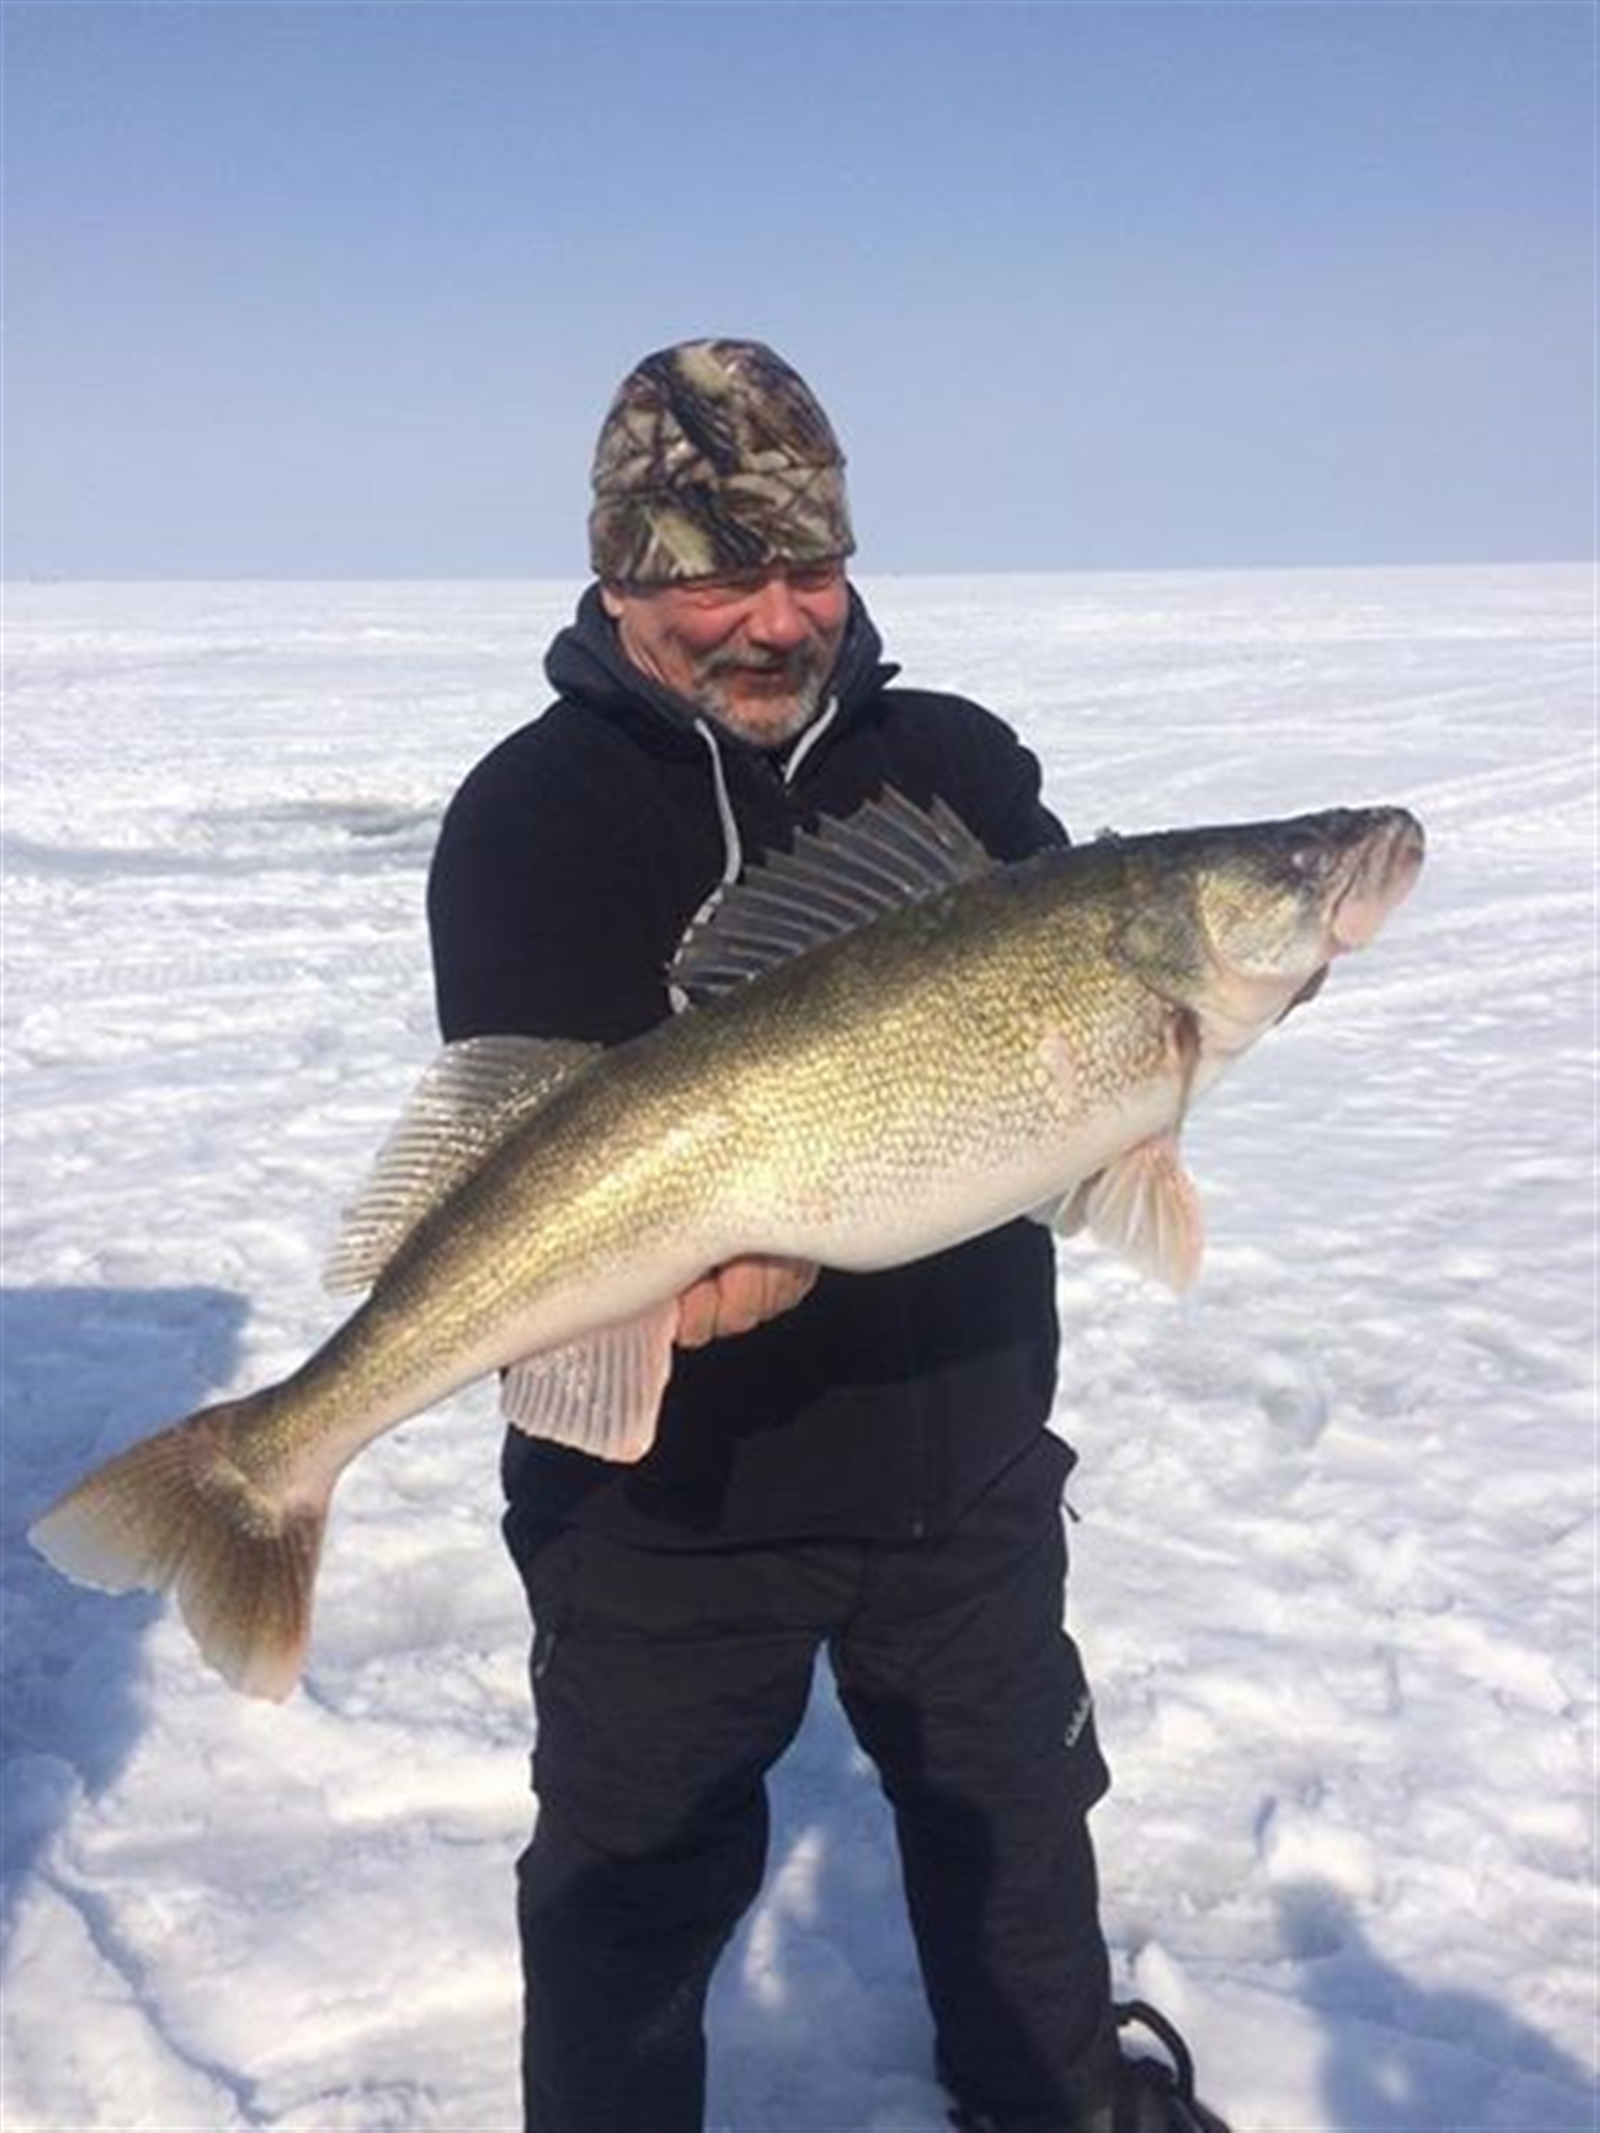 Bob Rustowicz of Cheektowaga shows off a 14.67-pound walleye he caught off Hamburg on Lake Erie last week. He was using a gold Swedish pimple. It took over first place in the Capt. Bob's Outdoors contest and is third place in the NYS Winter Classic competition. Yes, third.